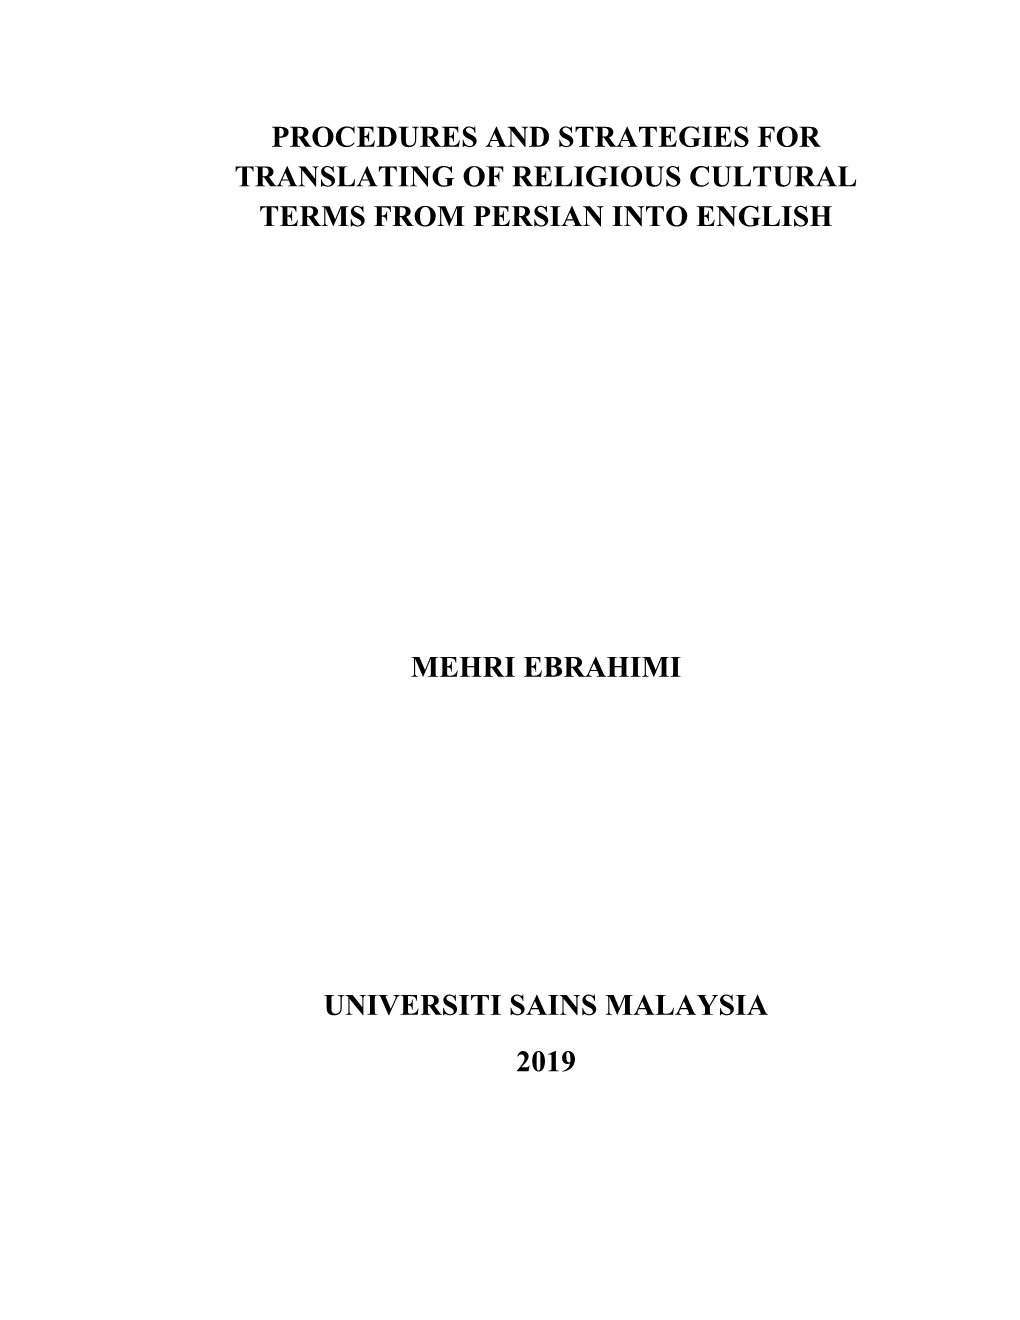 Procedures and Strategies for Translating of Religious Cultural Terms from Persian Into English